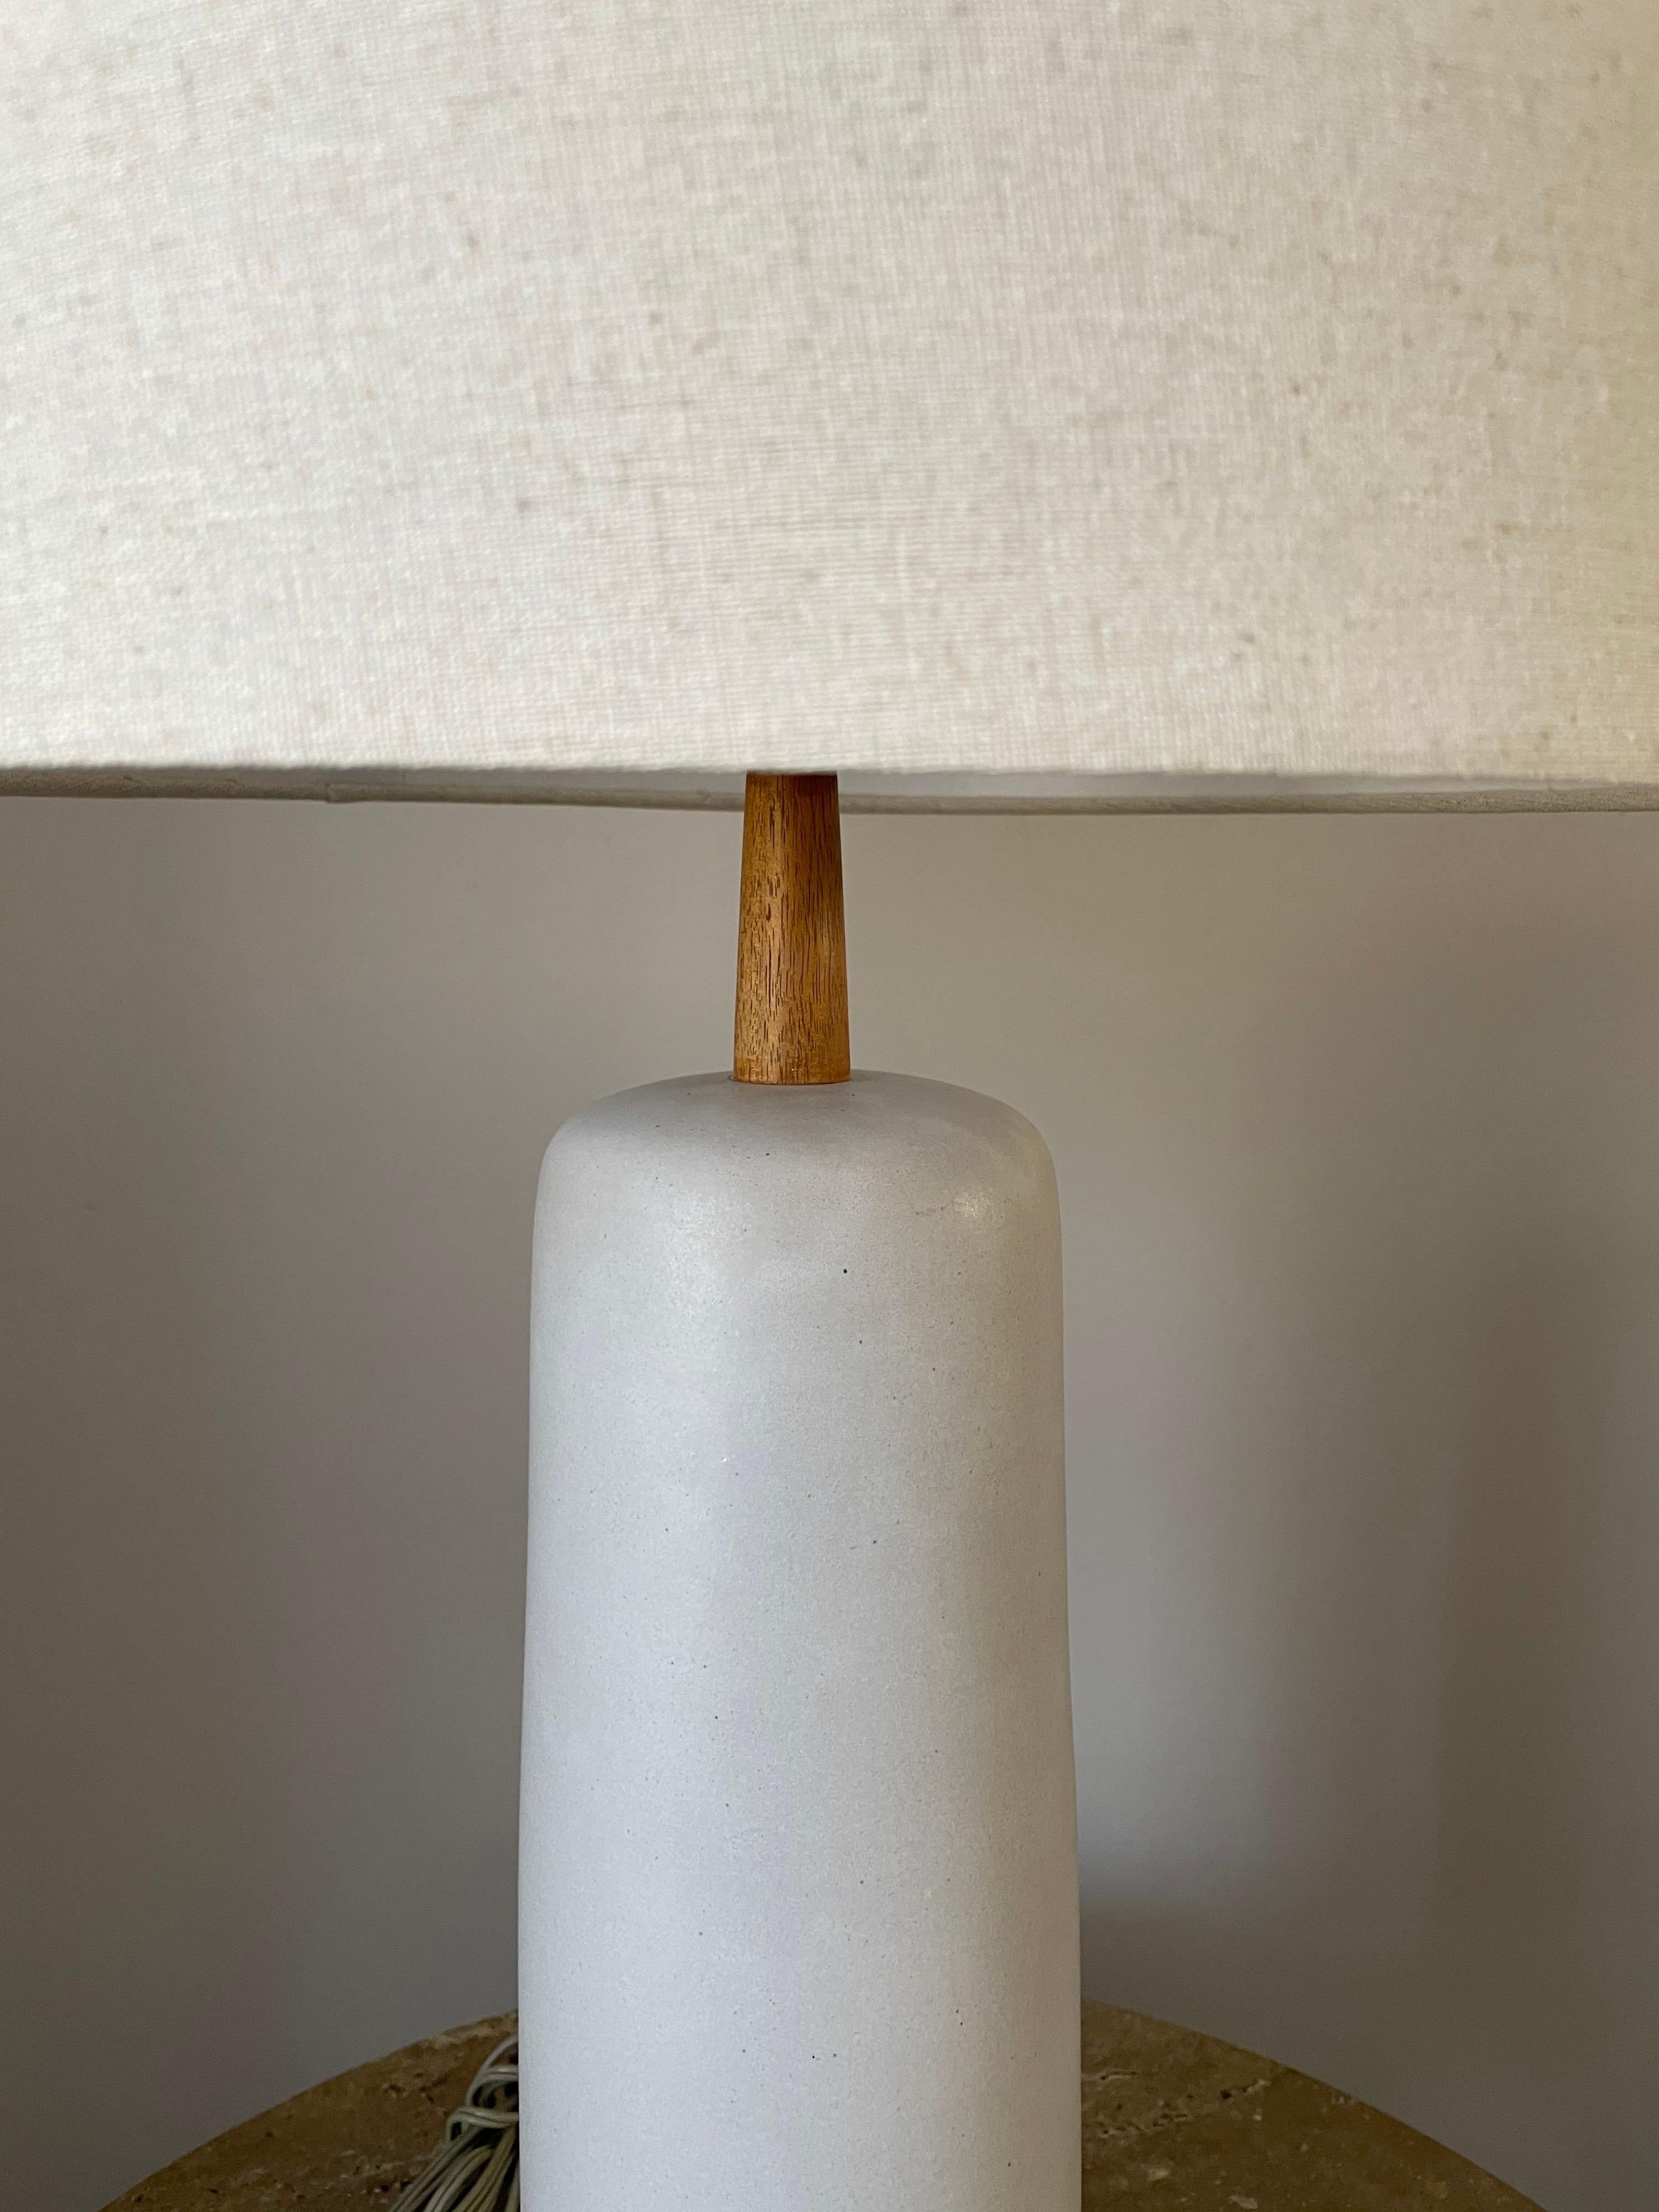 Elegant and timeless table lamp by ceramicist duo Jane and Gordon Martz for Marshall studios. Long off white matte glaze body with walnut neck and elongated walnut finial. 

Measures: Overall
30” tall
15” wide

Ceramic portion 
15.5” tall